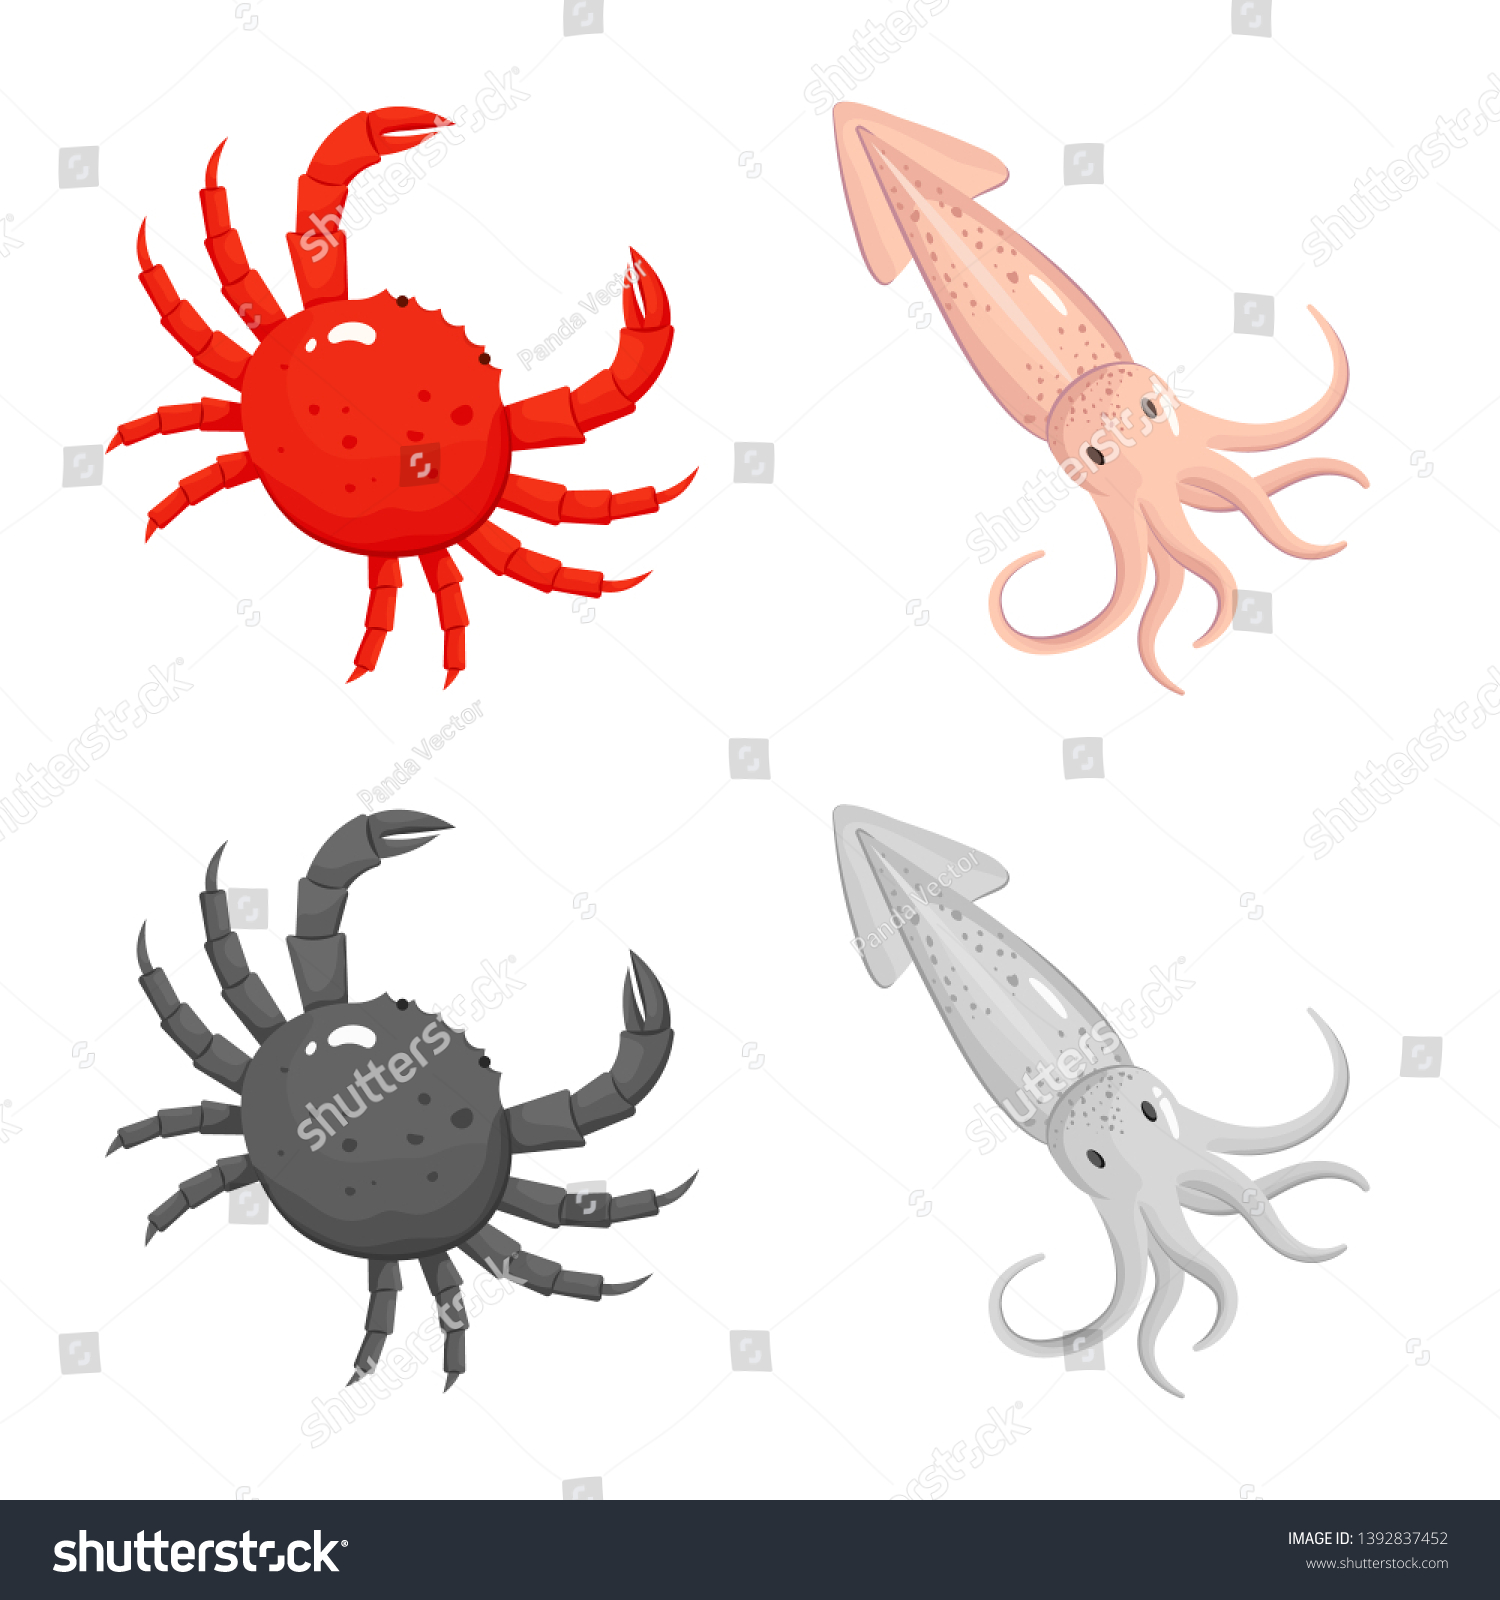 Isolated object of fresh  and restaurant logo. Set of fresh  and marine   stock vector illustration. #1392837452